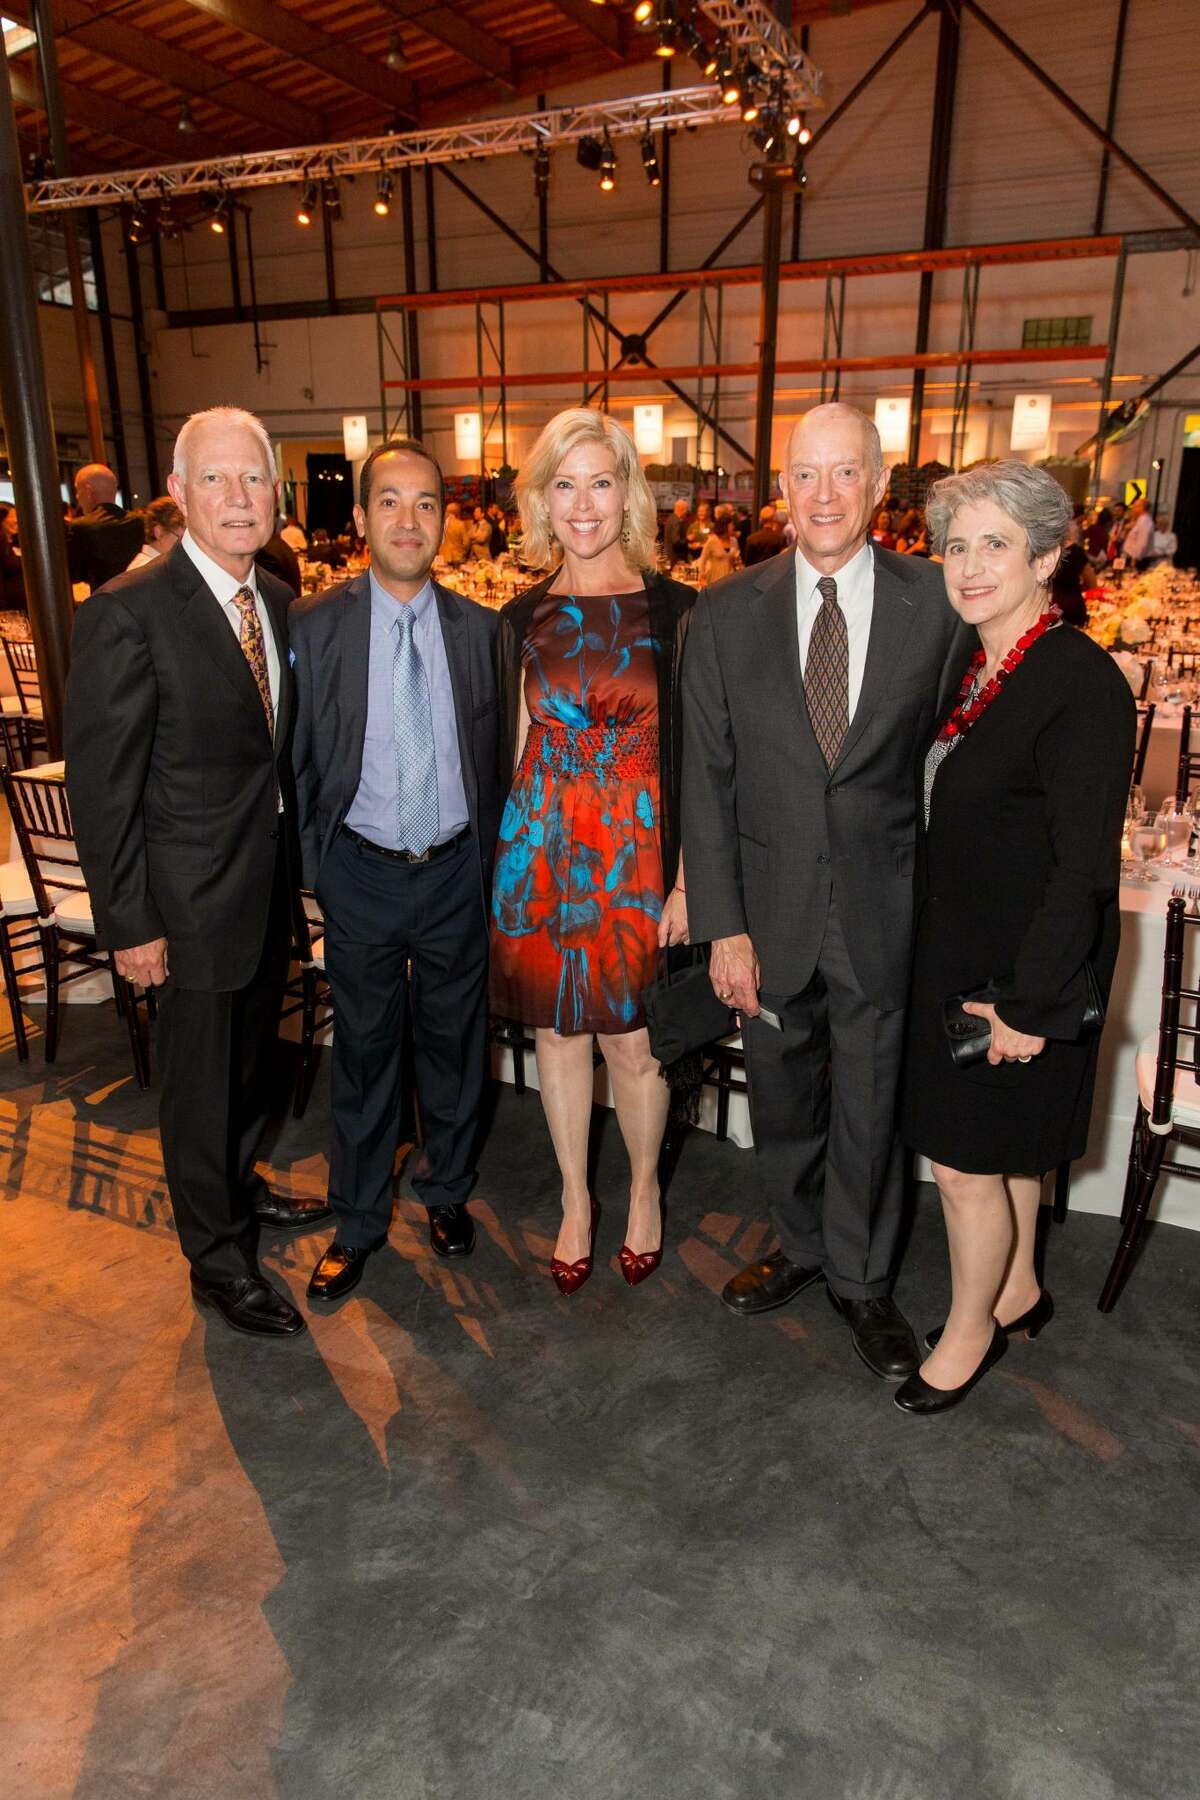 Paul Ash, Miguel Nunez, Mariette Nunez, Stephen Pearce and Laurie Pearce at the SF-Marin Food Bank’s annual “One Big Table” gala.